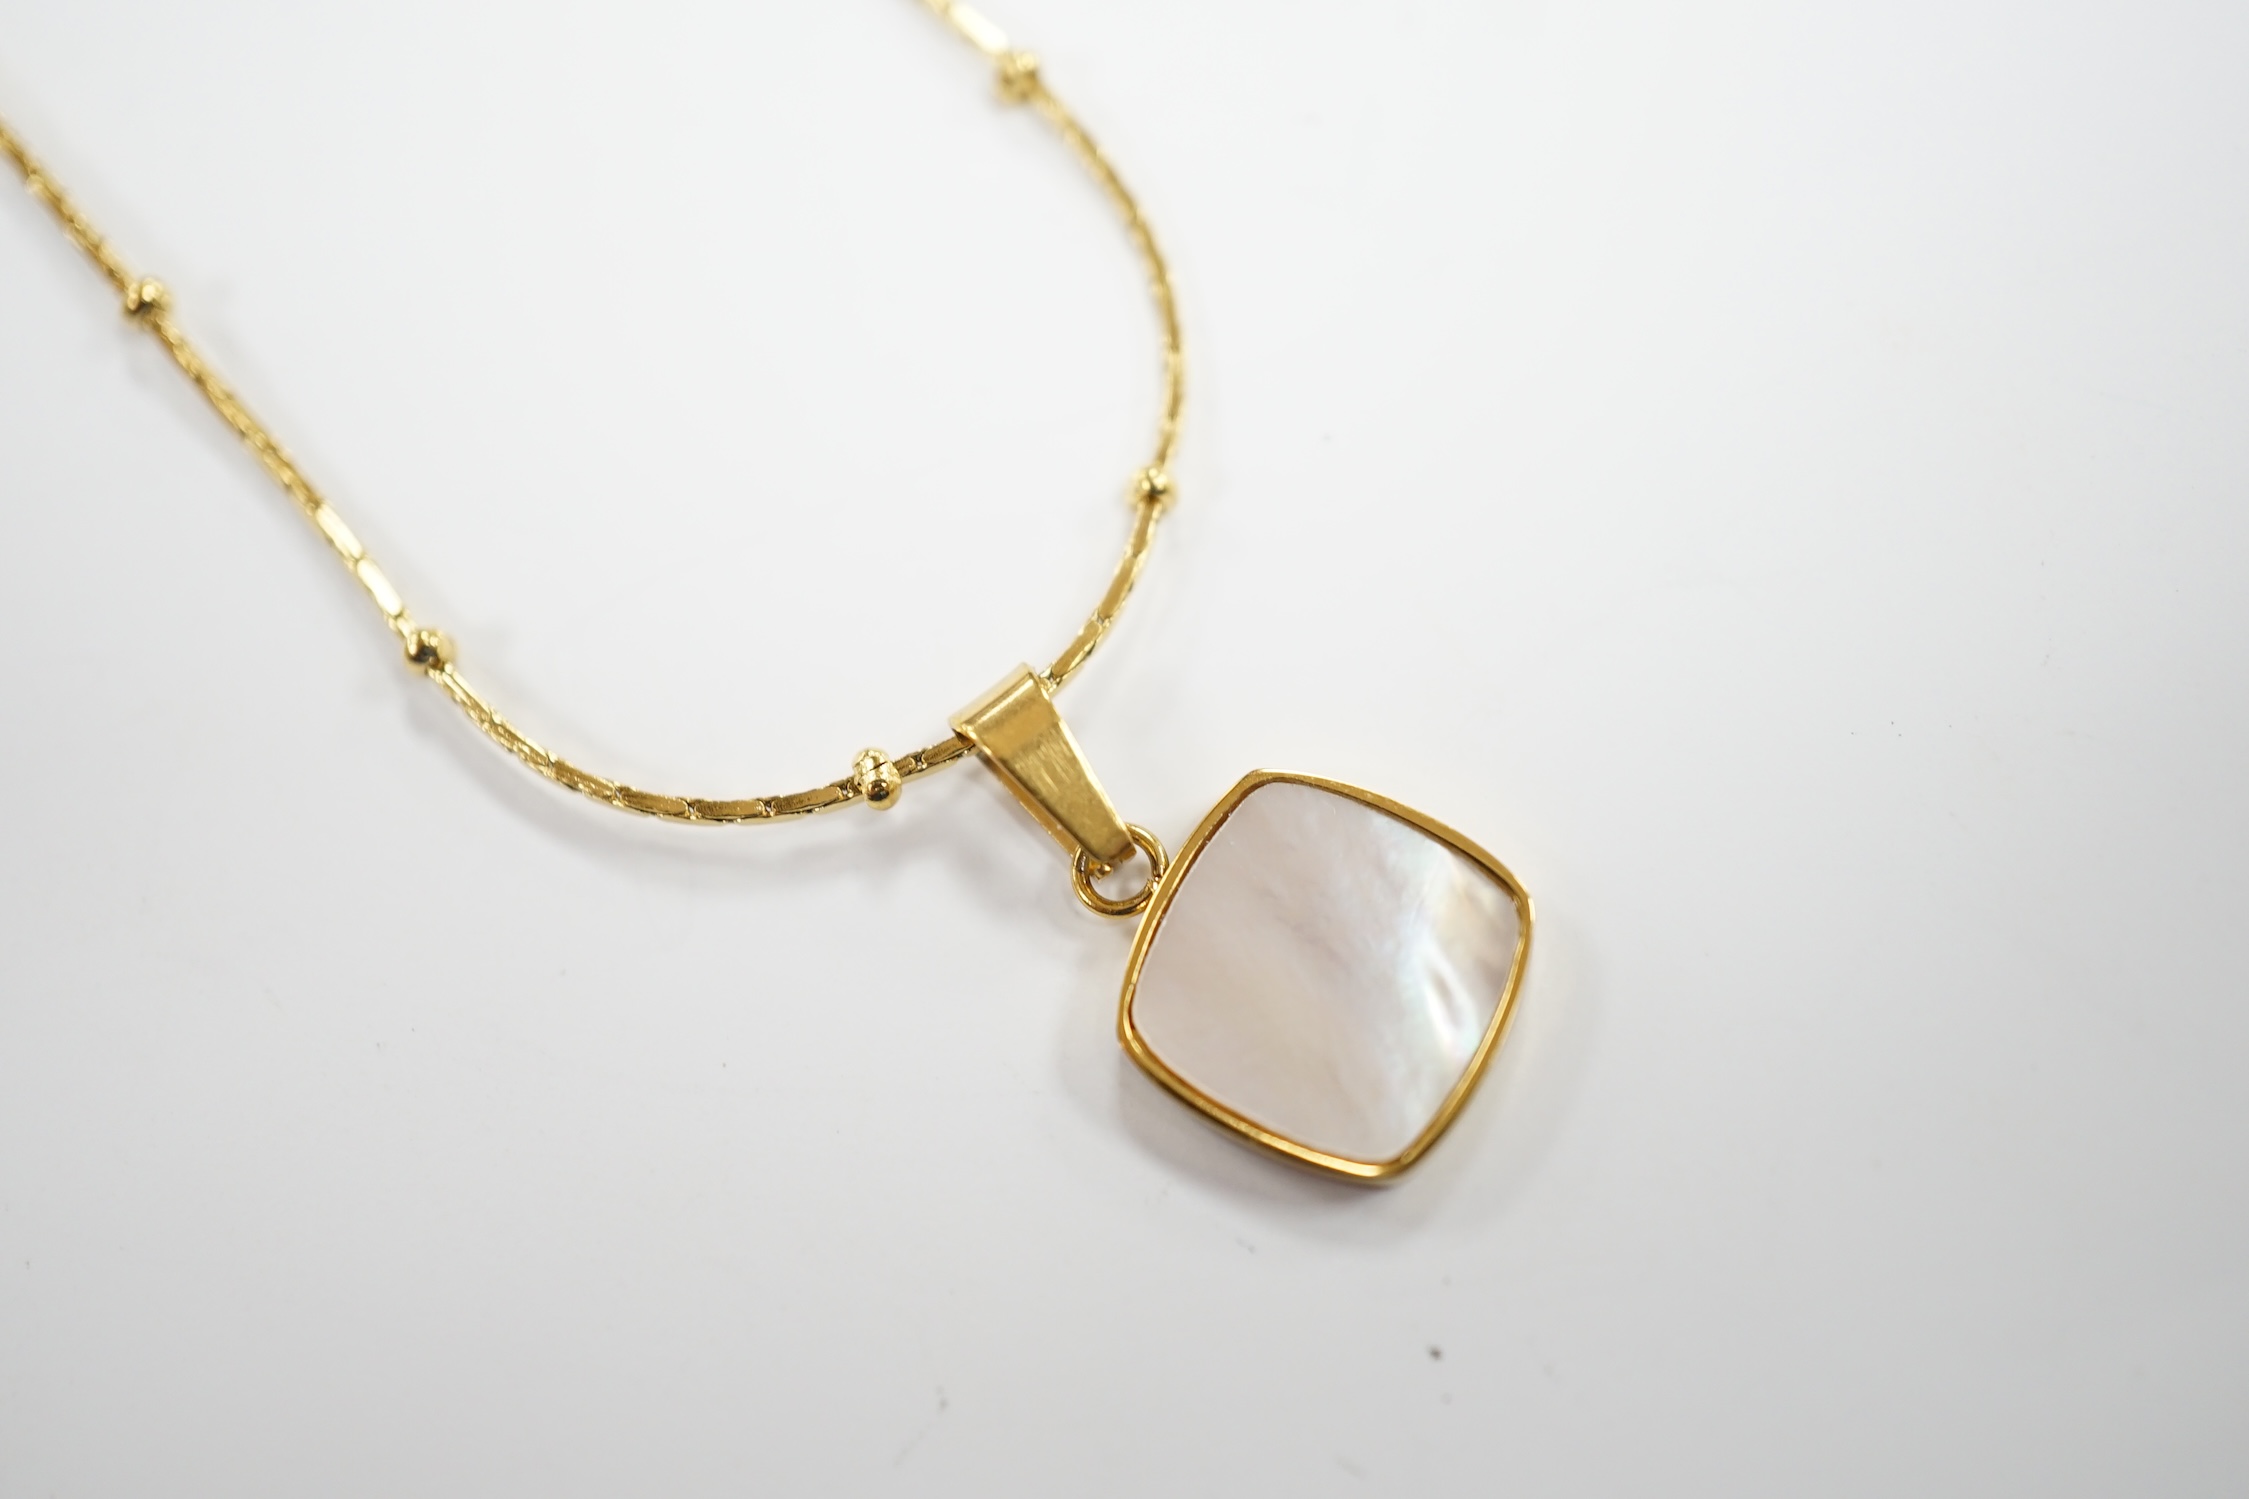 A yellow metal and mother of pearl inset pendant, 11mm on a 18kt fine link chain, 42cm, gross weight 3.4 grams.